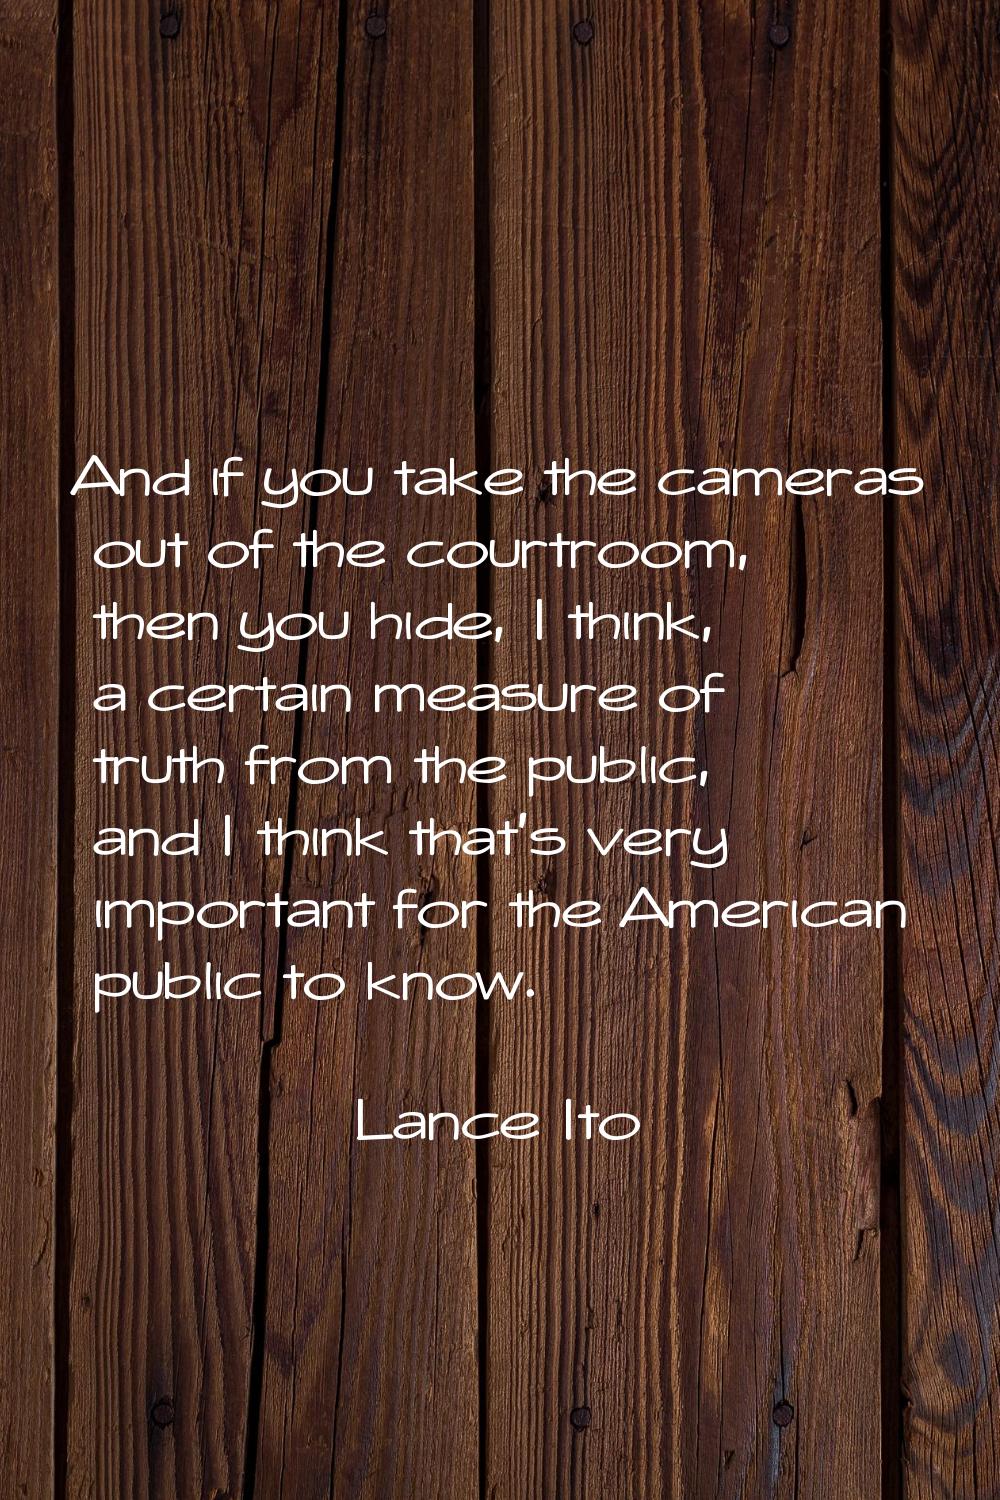 And if you take the cameras out of the courtroom, then you hide, I think, a certain measure of trut